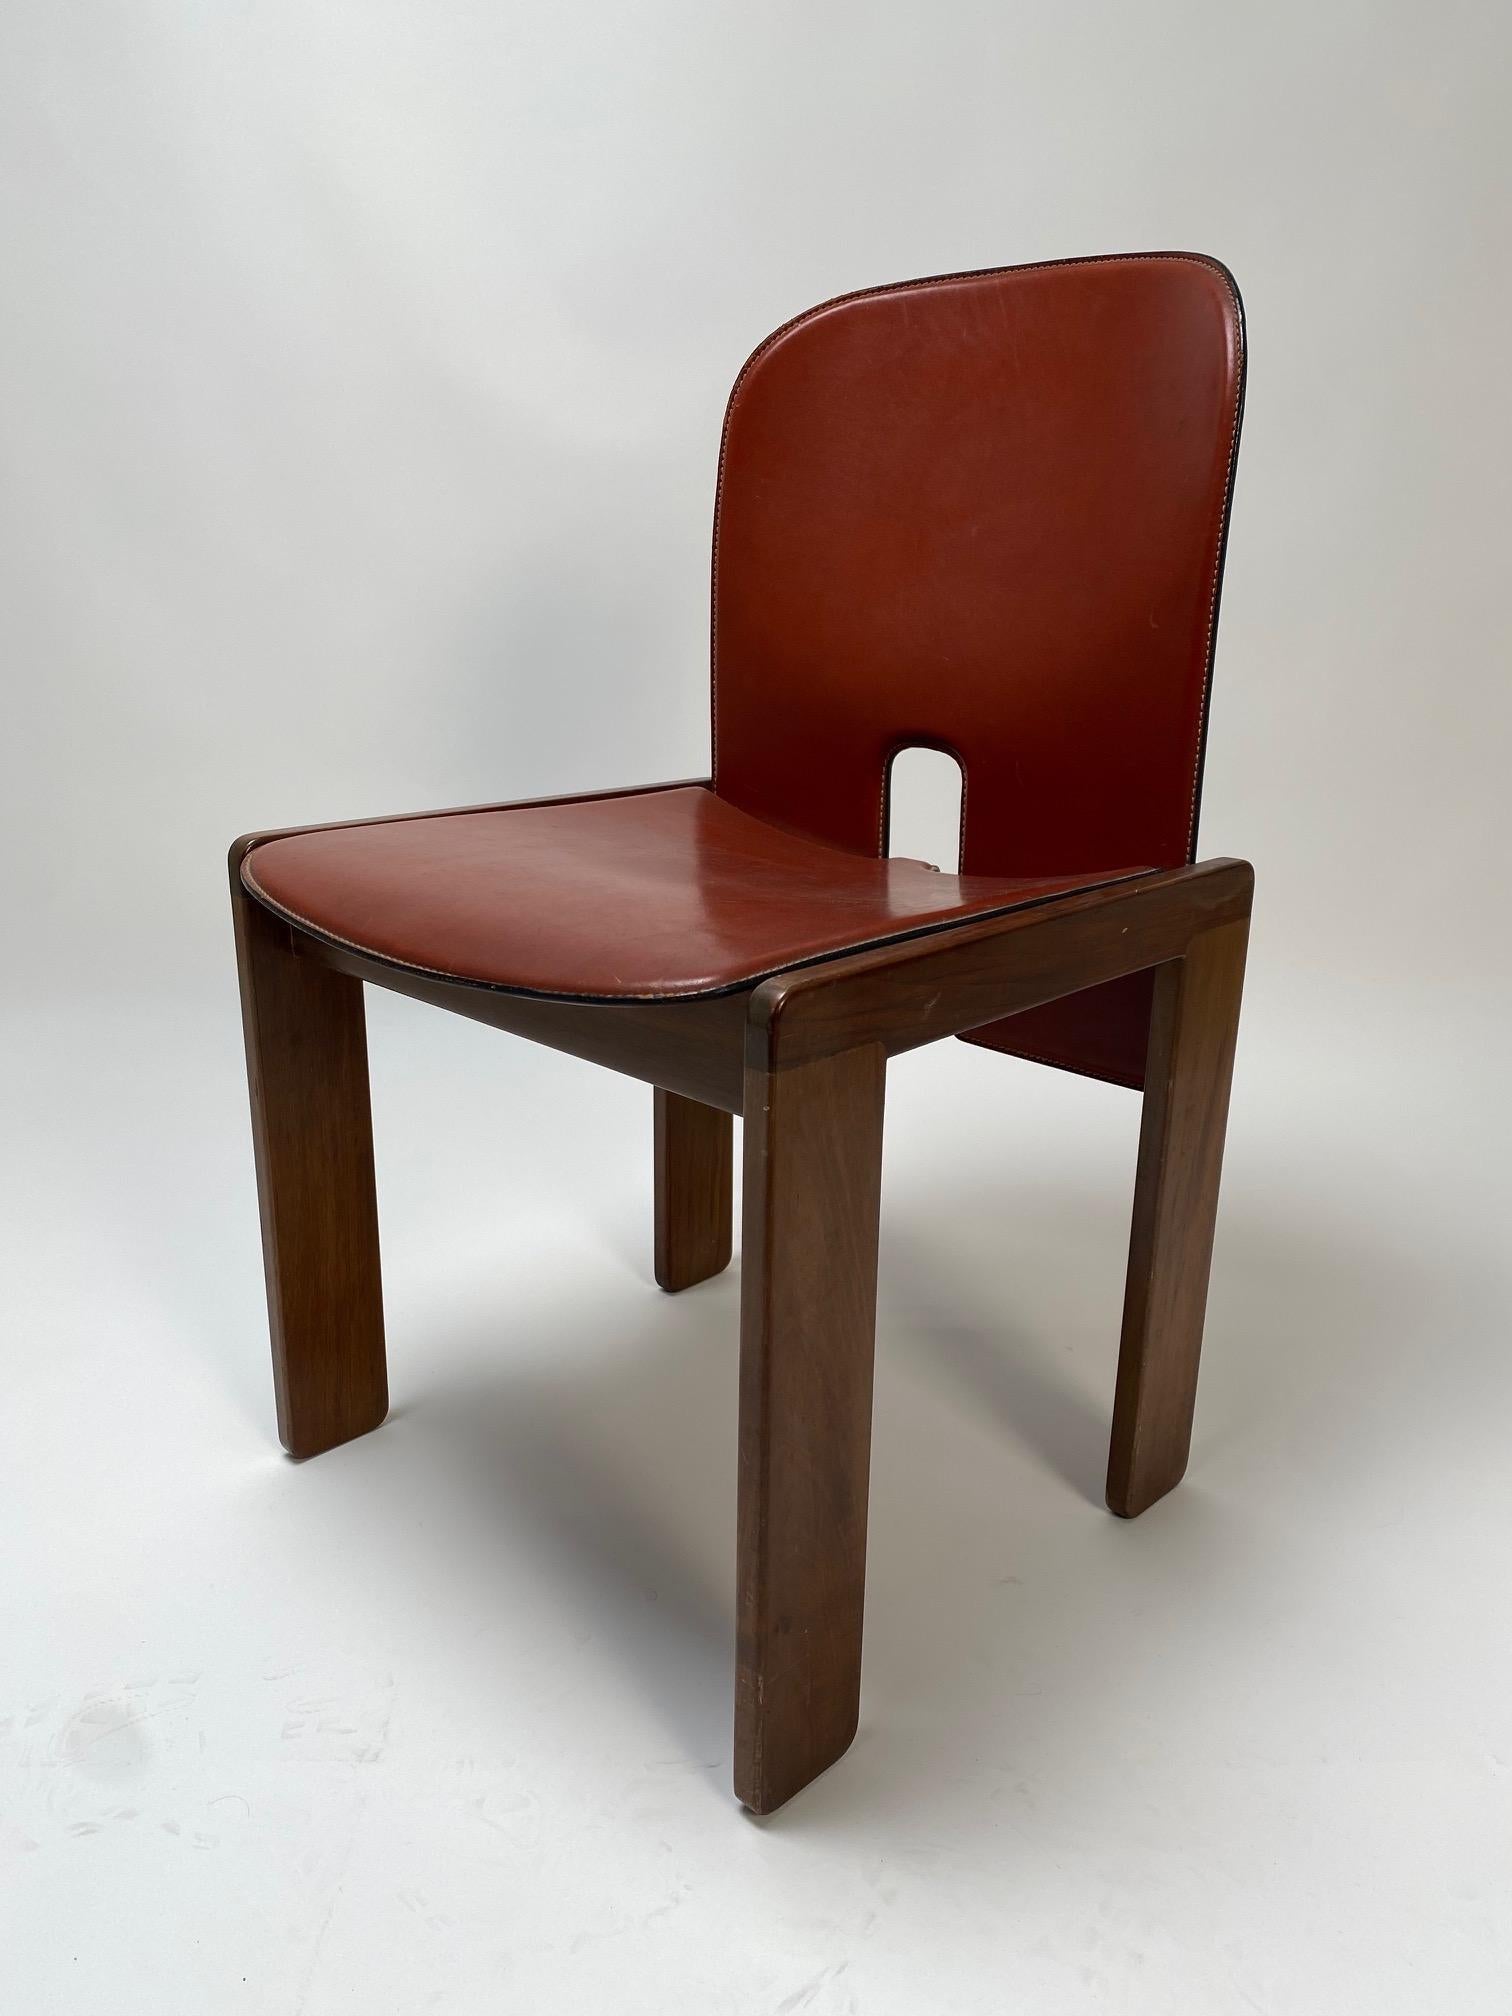 Afra and Tobia Scarpa, set of 10 leather and wood chairs made for Cassina, Italy, 1967.

It is one of the icons of Italian design, a perfect piece of furniture to be used as dining chairs but also for study or office.
The chairs are perfectly